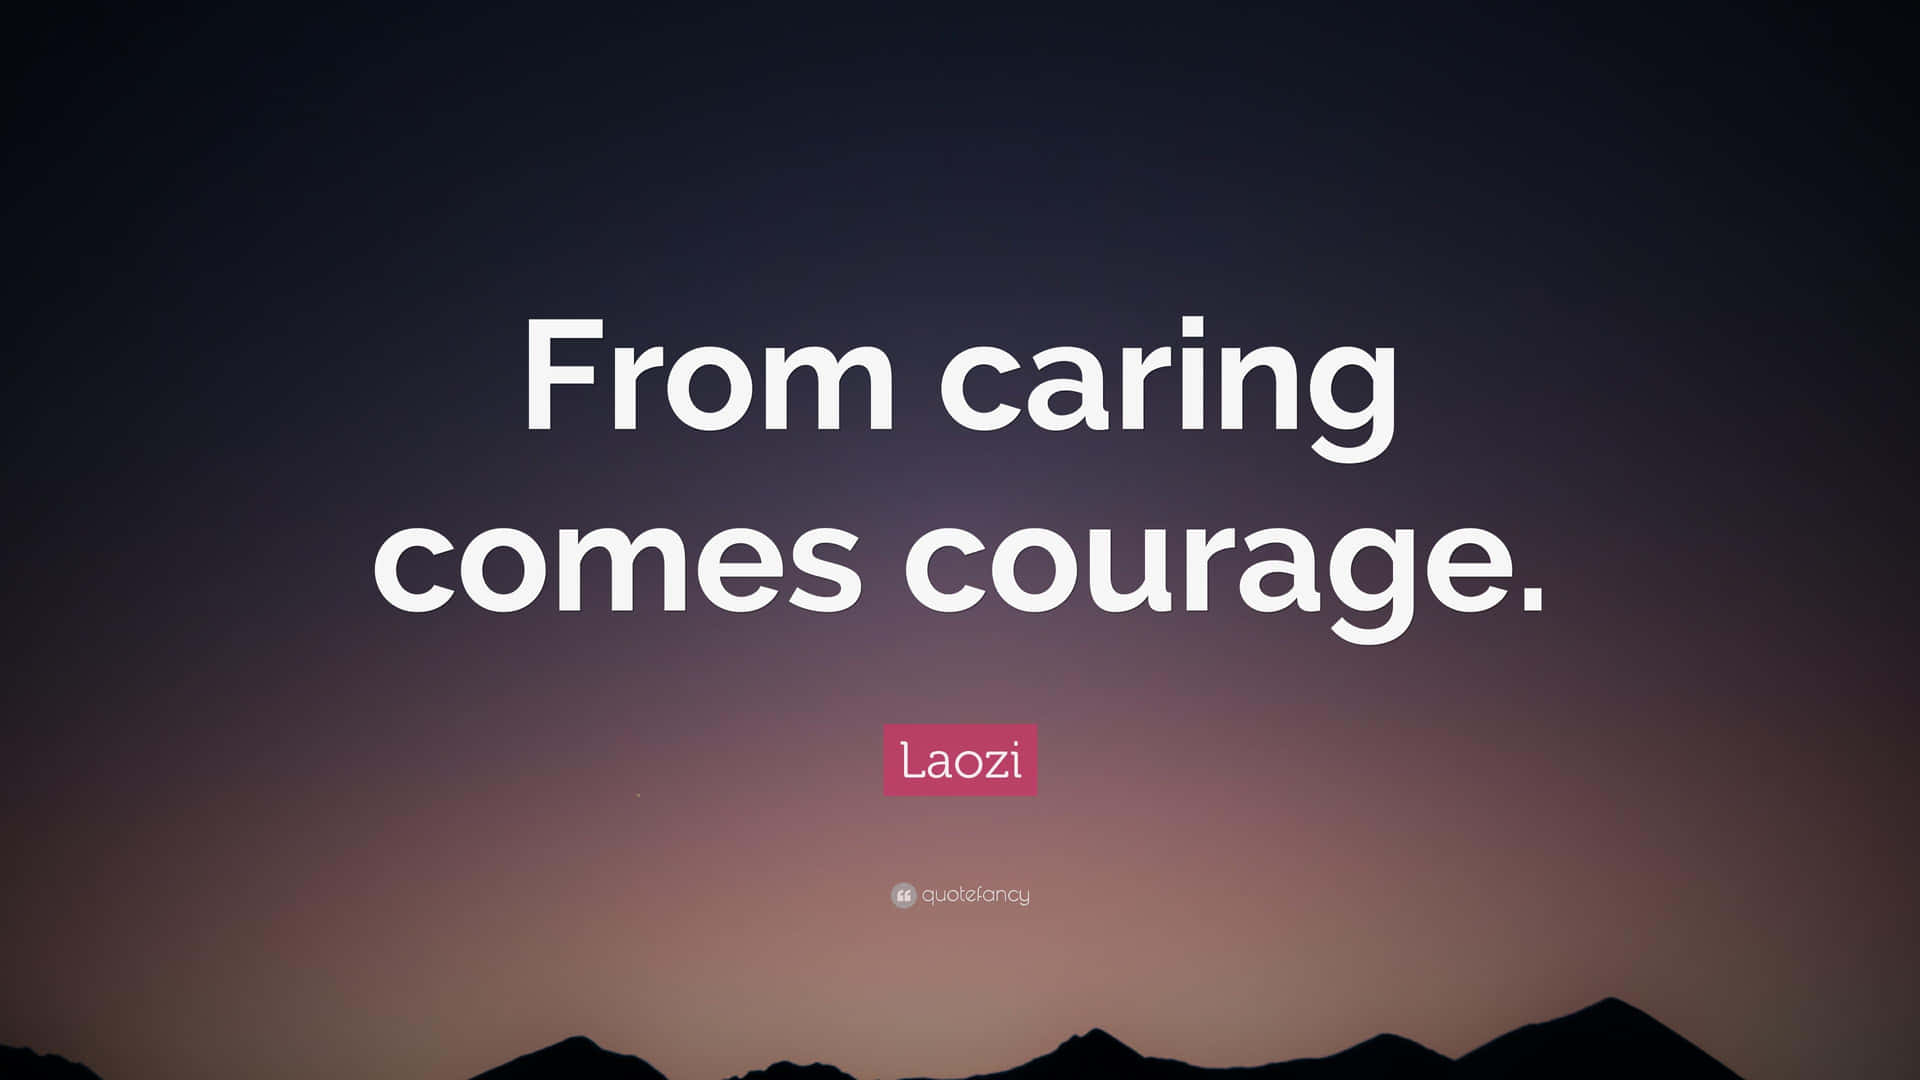 Caring Courage Quoteby Laozi Background